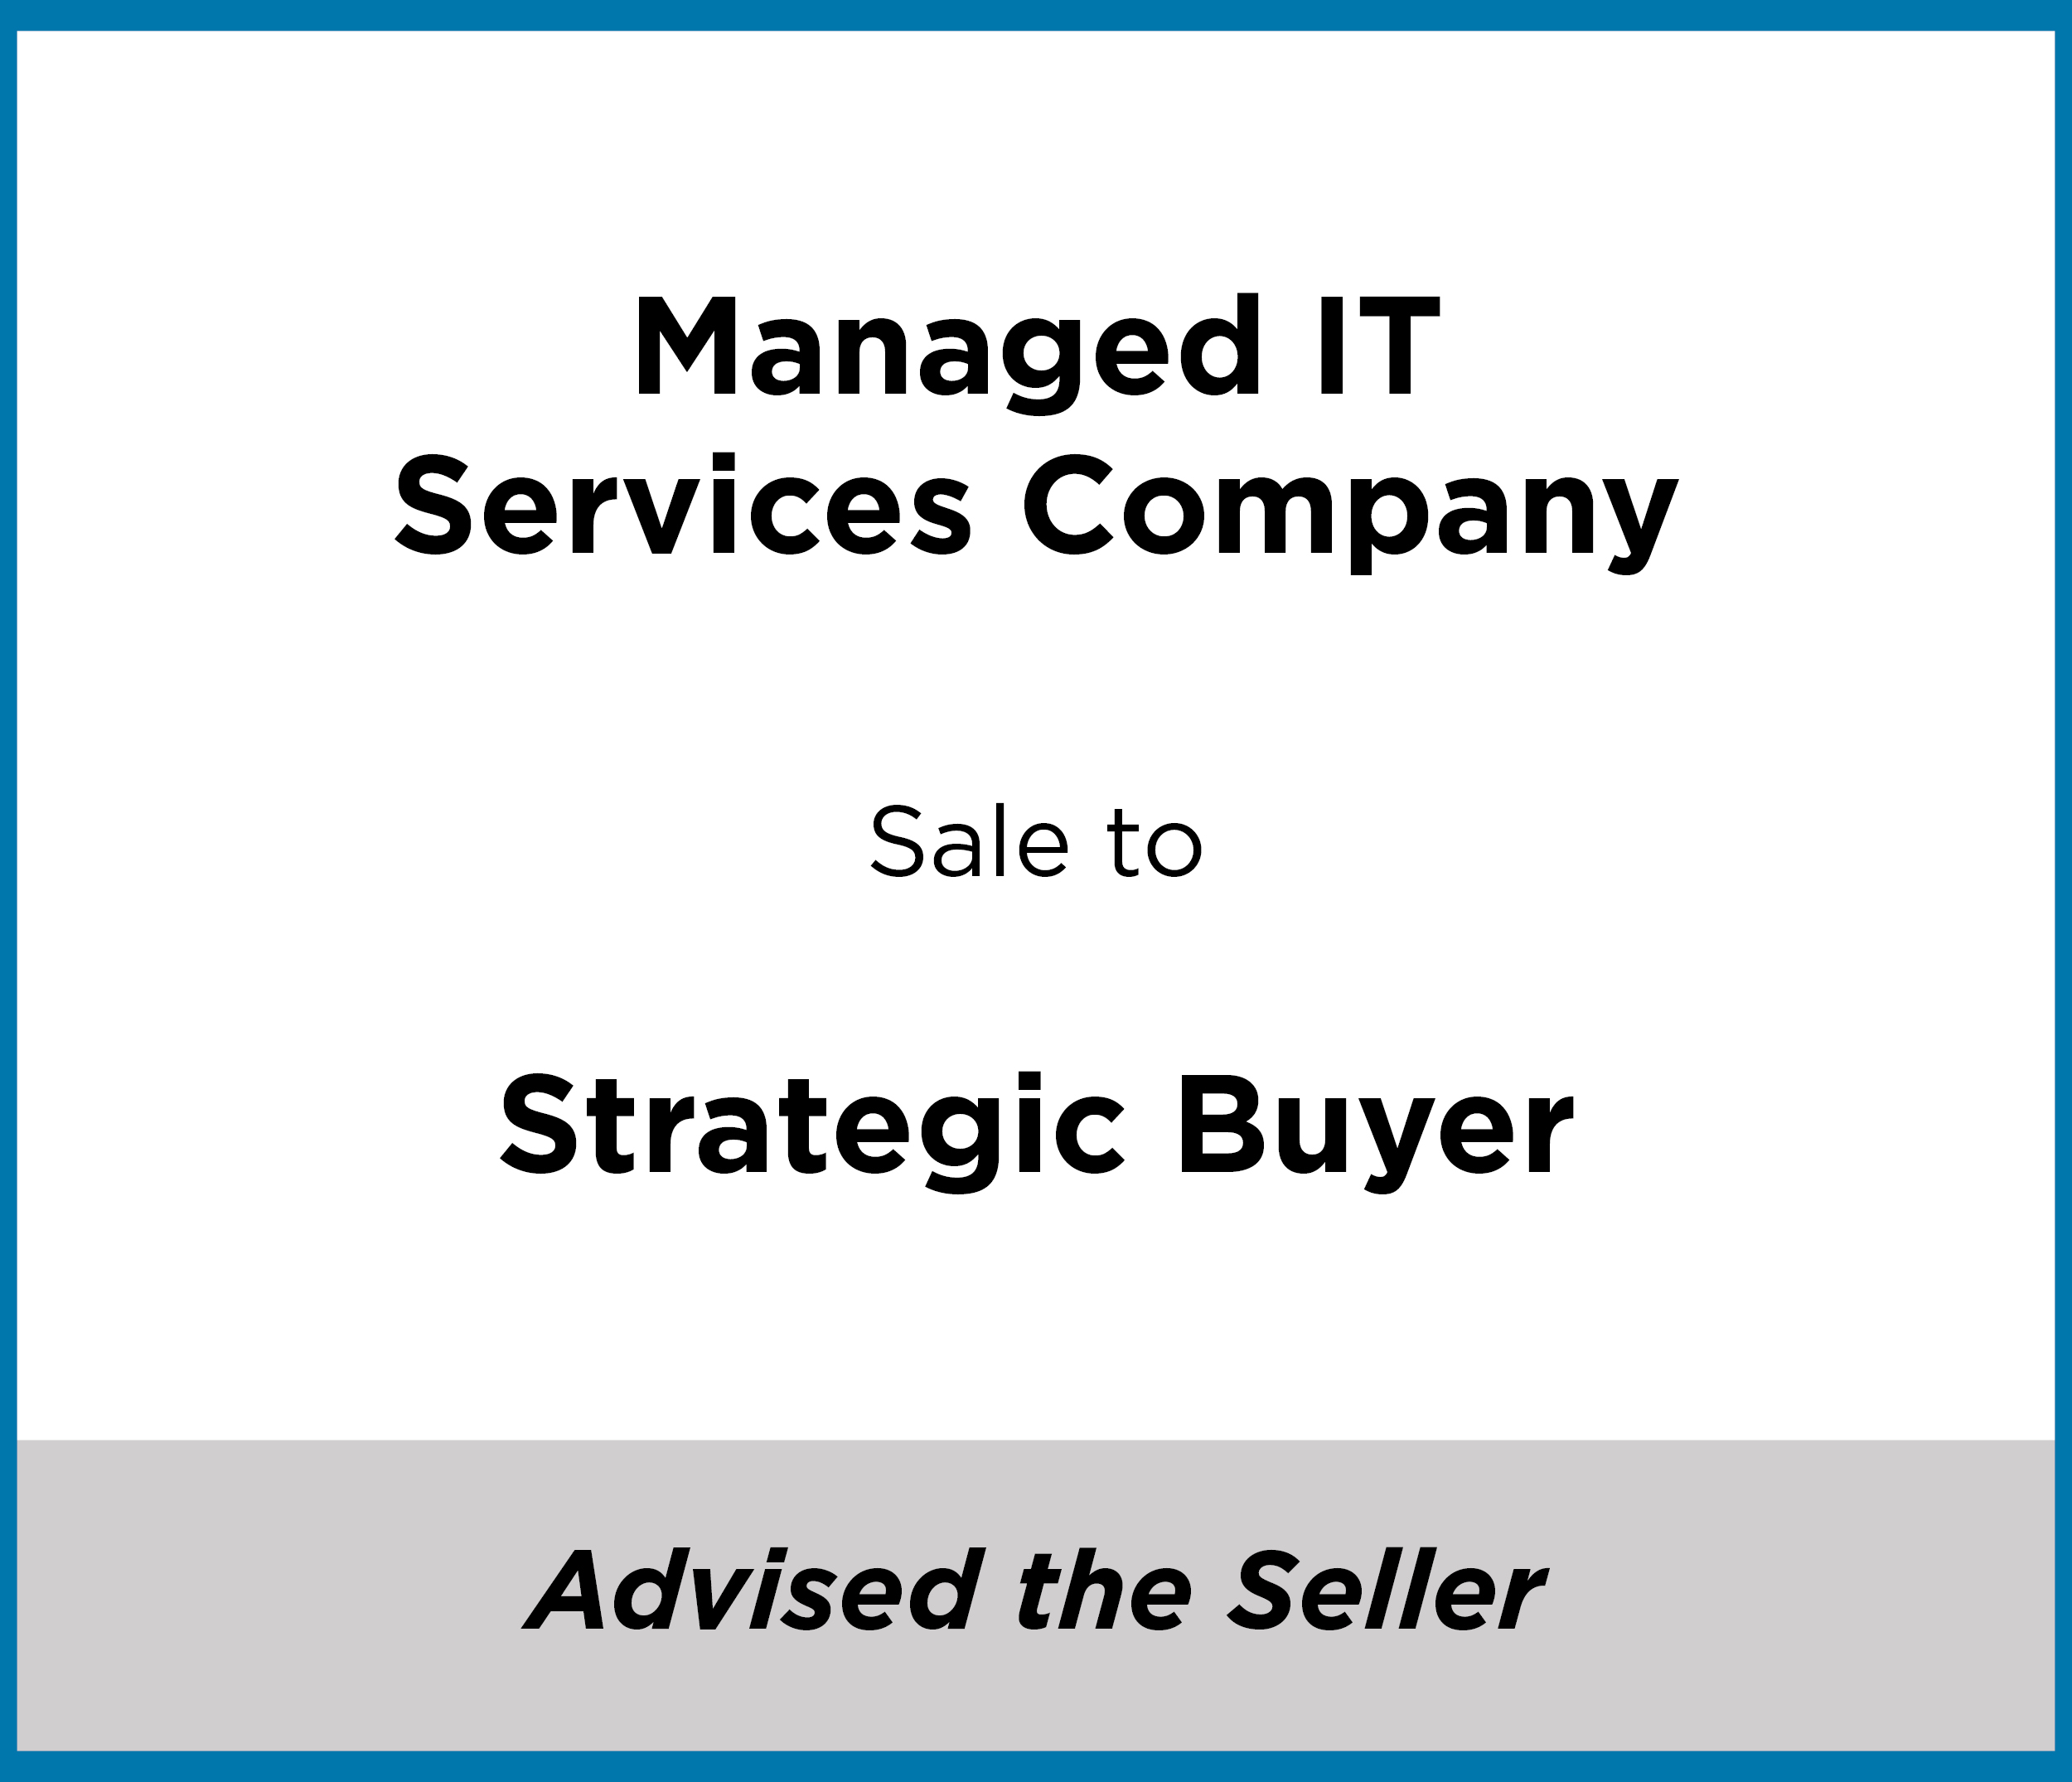 Managed IT Services Provider (MSP) for law firms - Vancouver, BC | Acquisition by strategic company